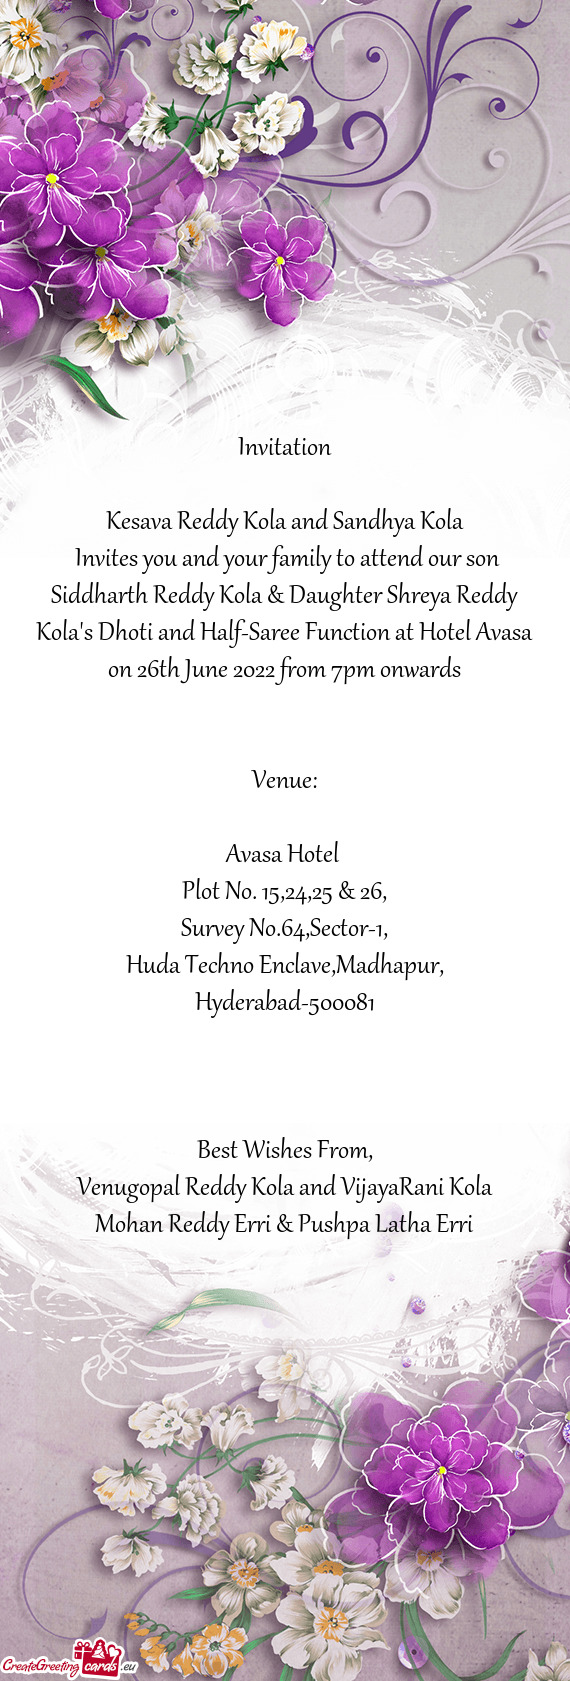 Invites you and your family to attend our son Siddharth Reddy Kola & Daughter Shreya Reddy Kola